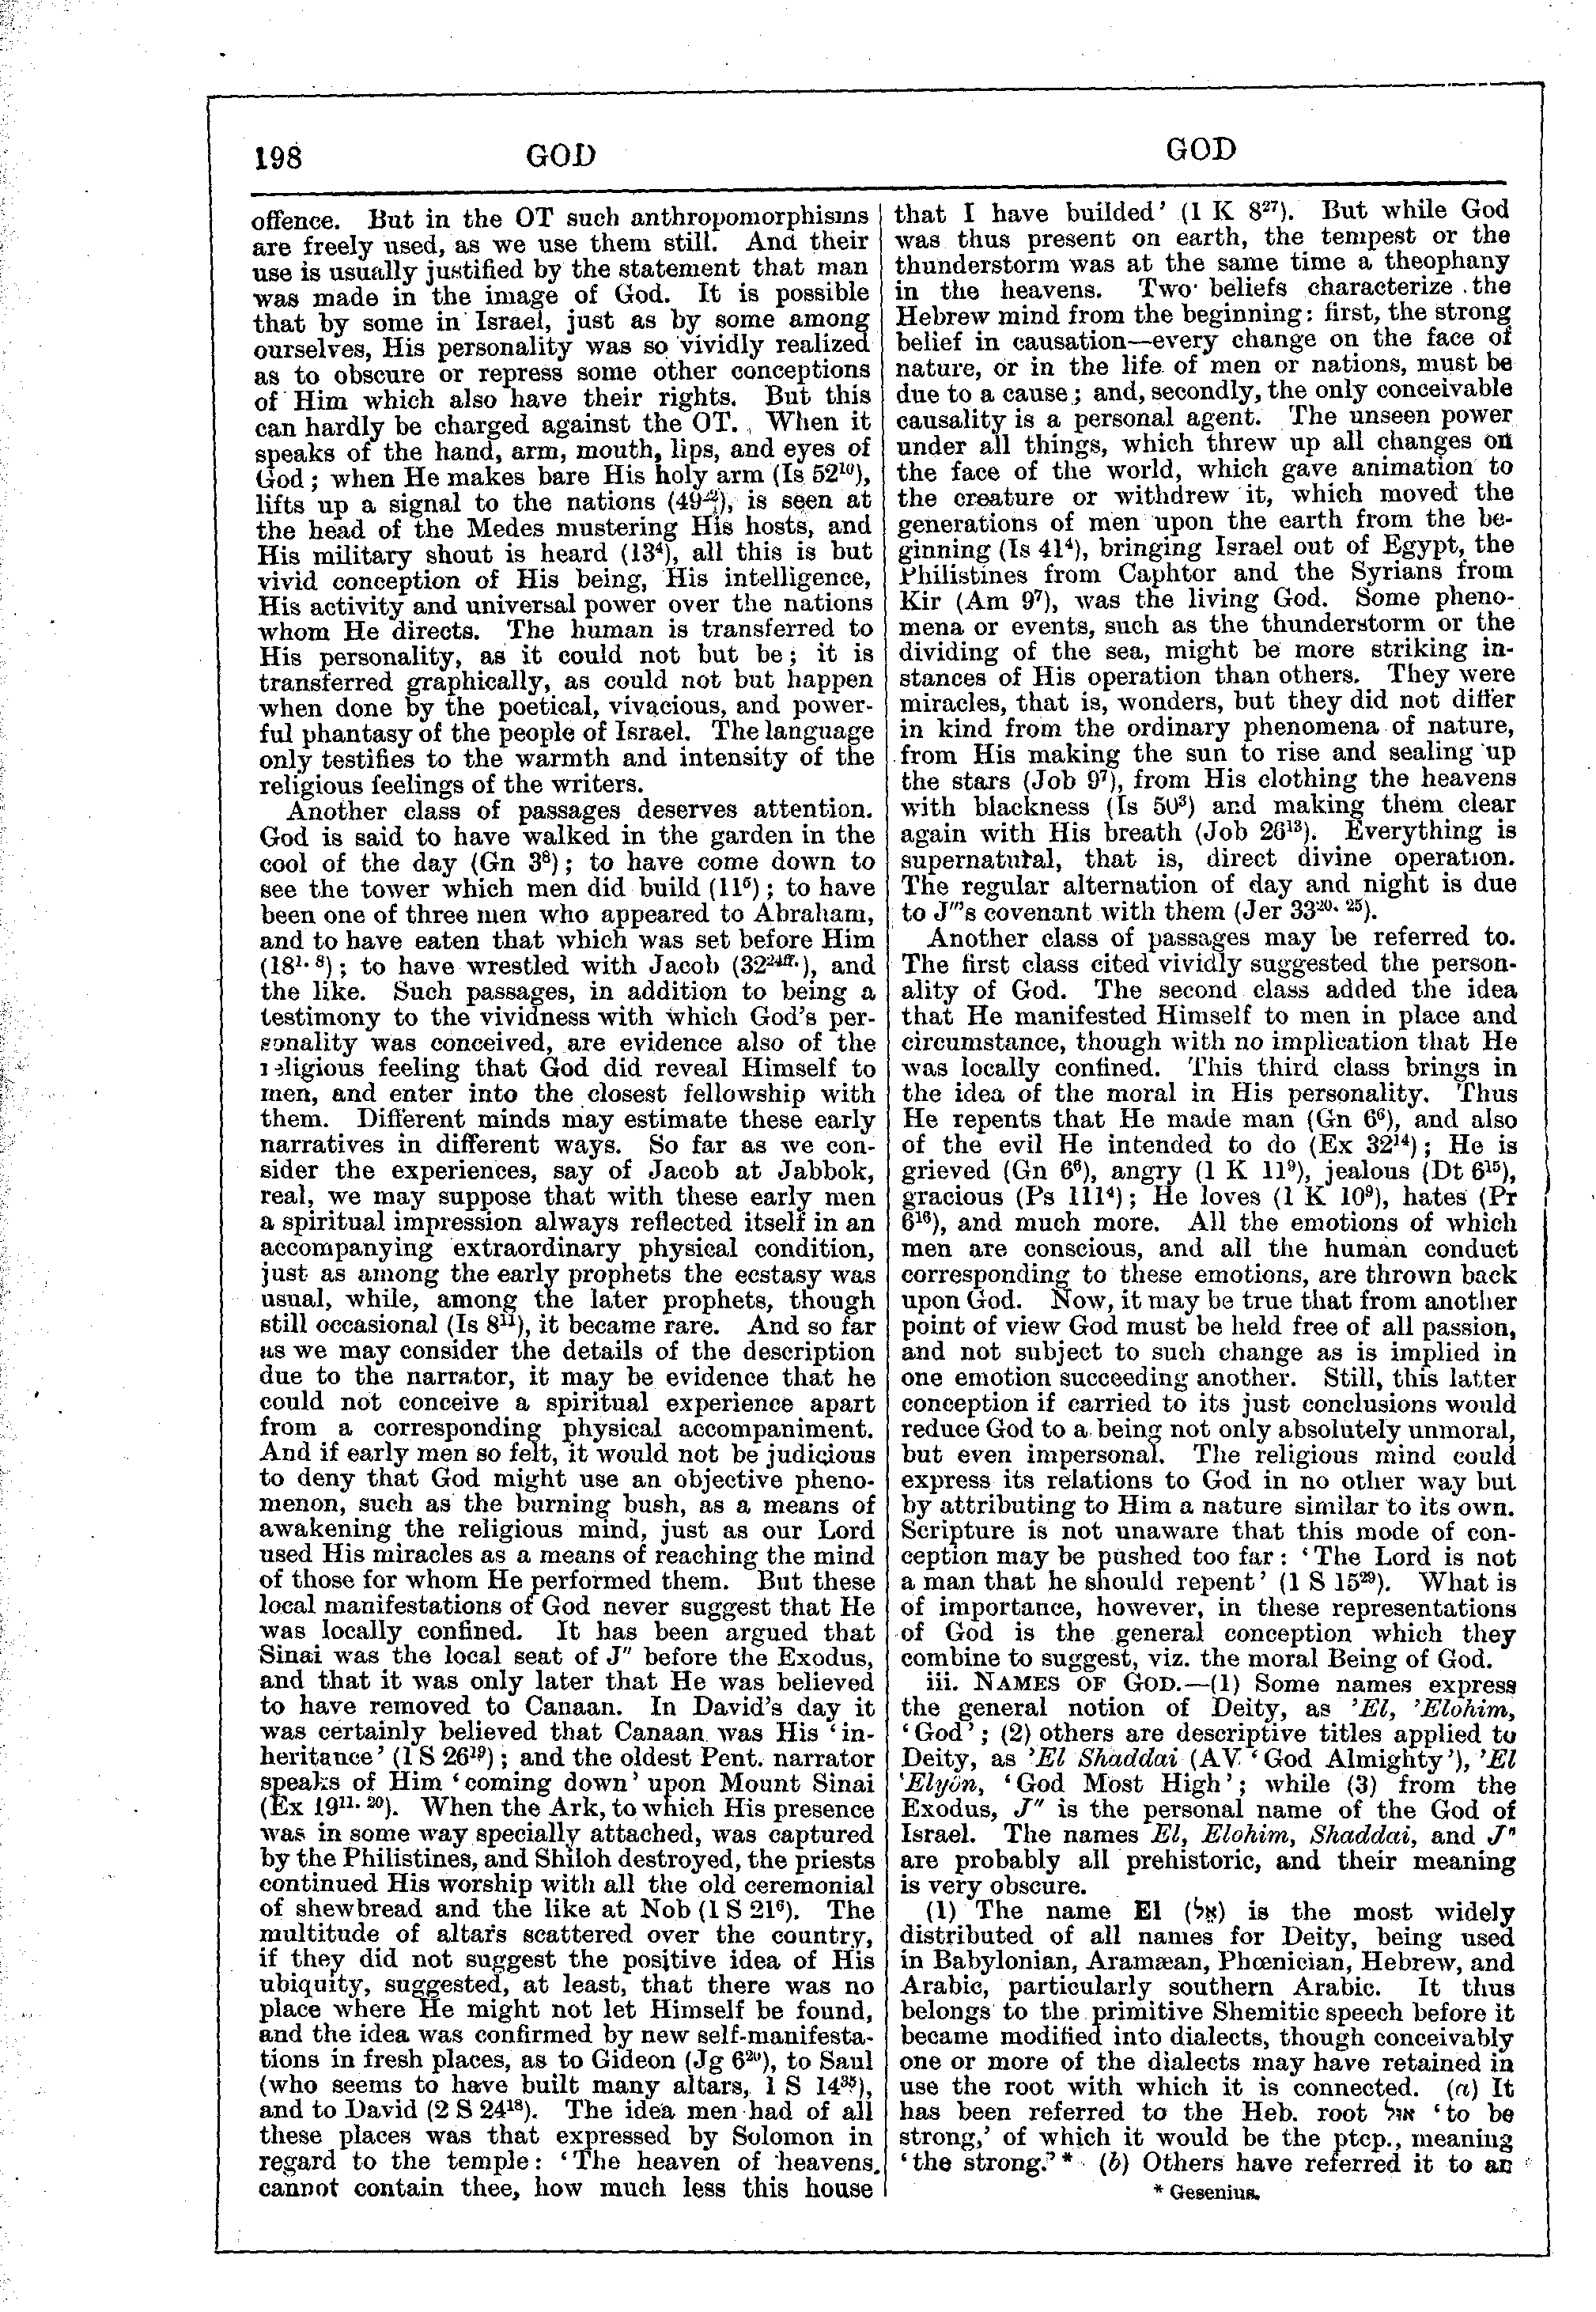 Image of page 198